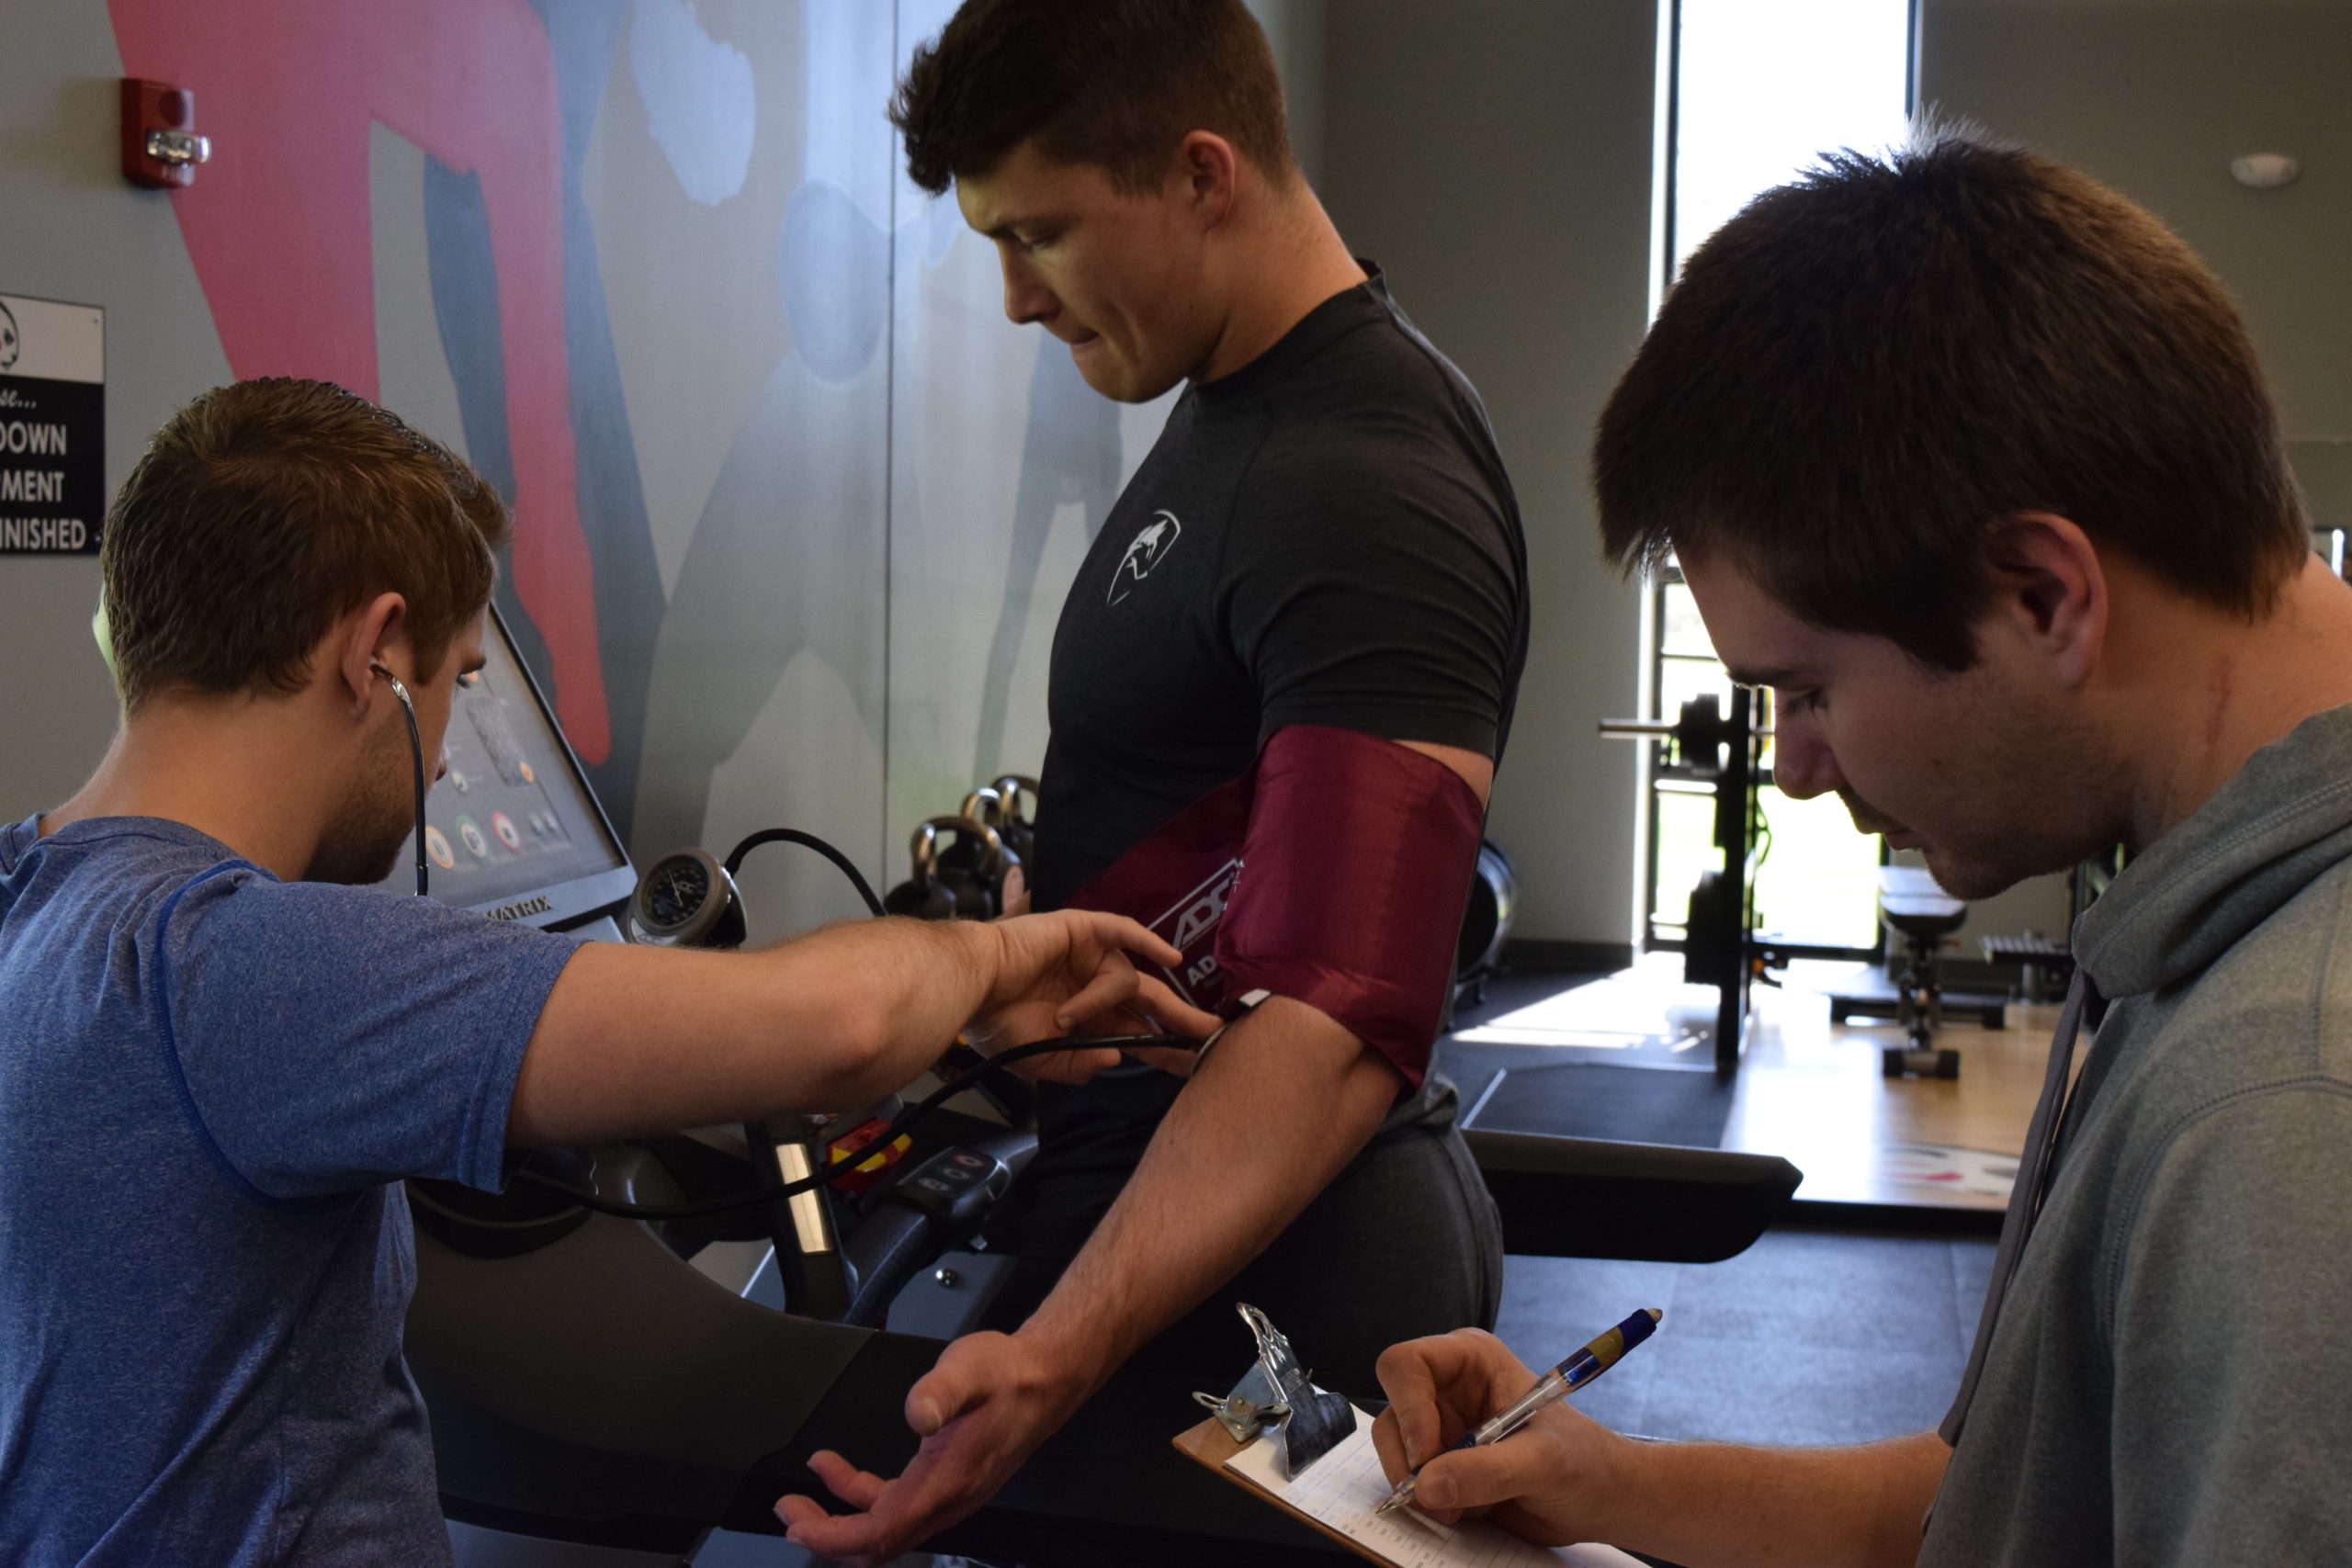 Two Blackburn students analyzing a student-athlete. One of the students uses a sphygmomanometer and a stethoscope on the athlete while the other one takes notes.